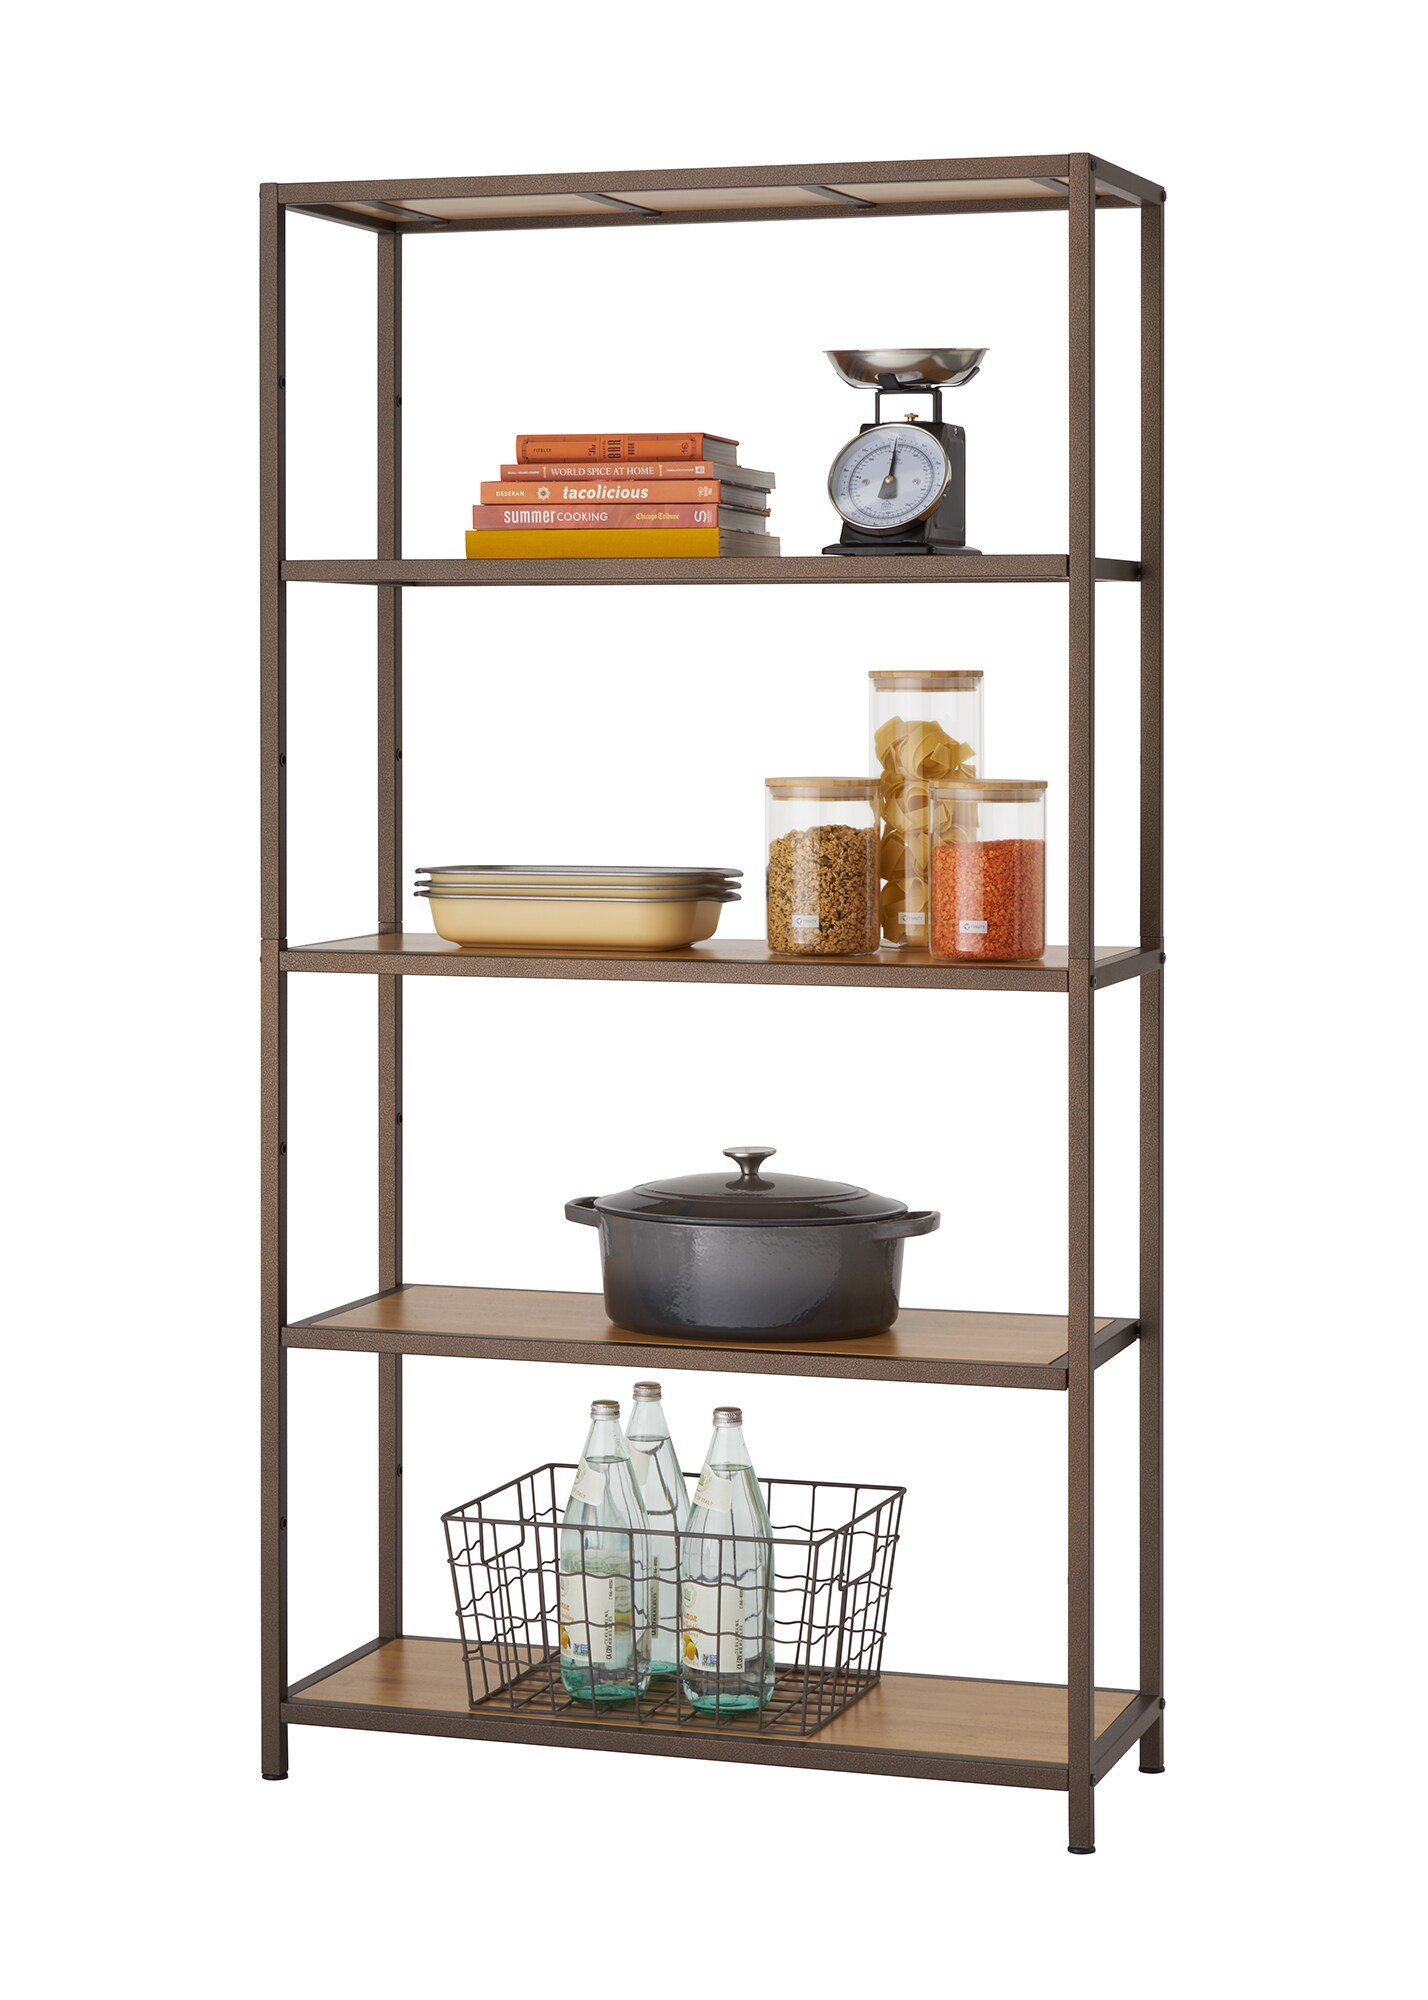 Wooden Floor-Wide Clamping Shelves & Industrial Shelving B: 3,5-12,5m NEW Storage Shelf Incl 